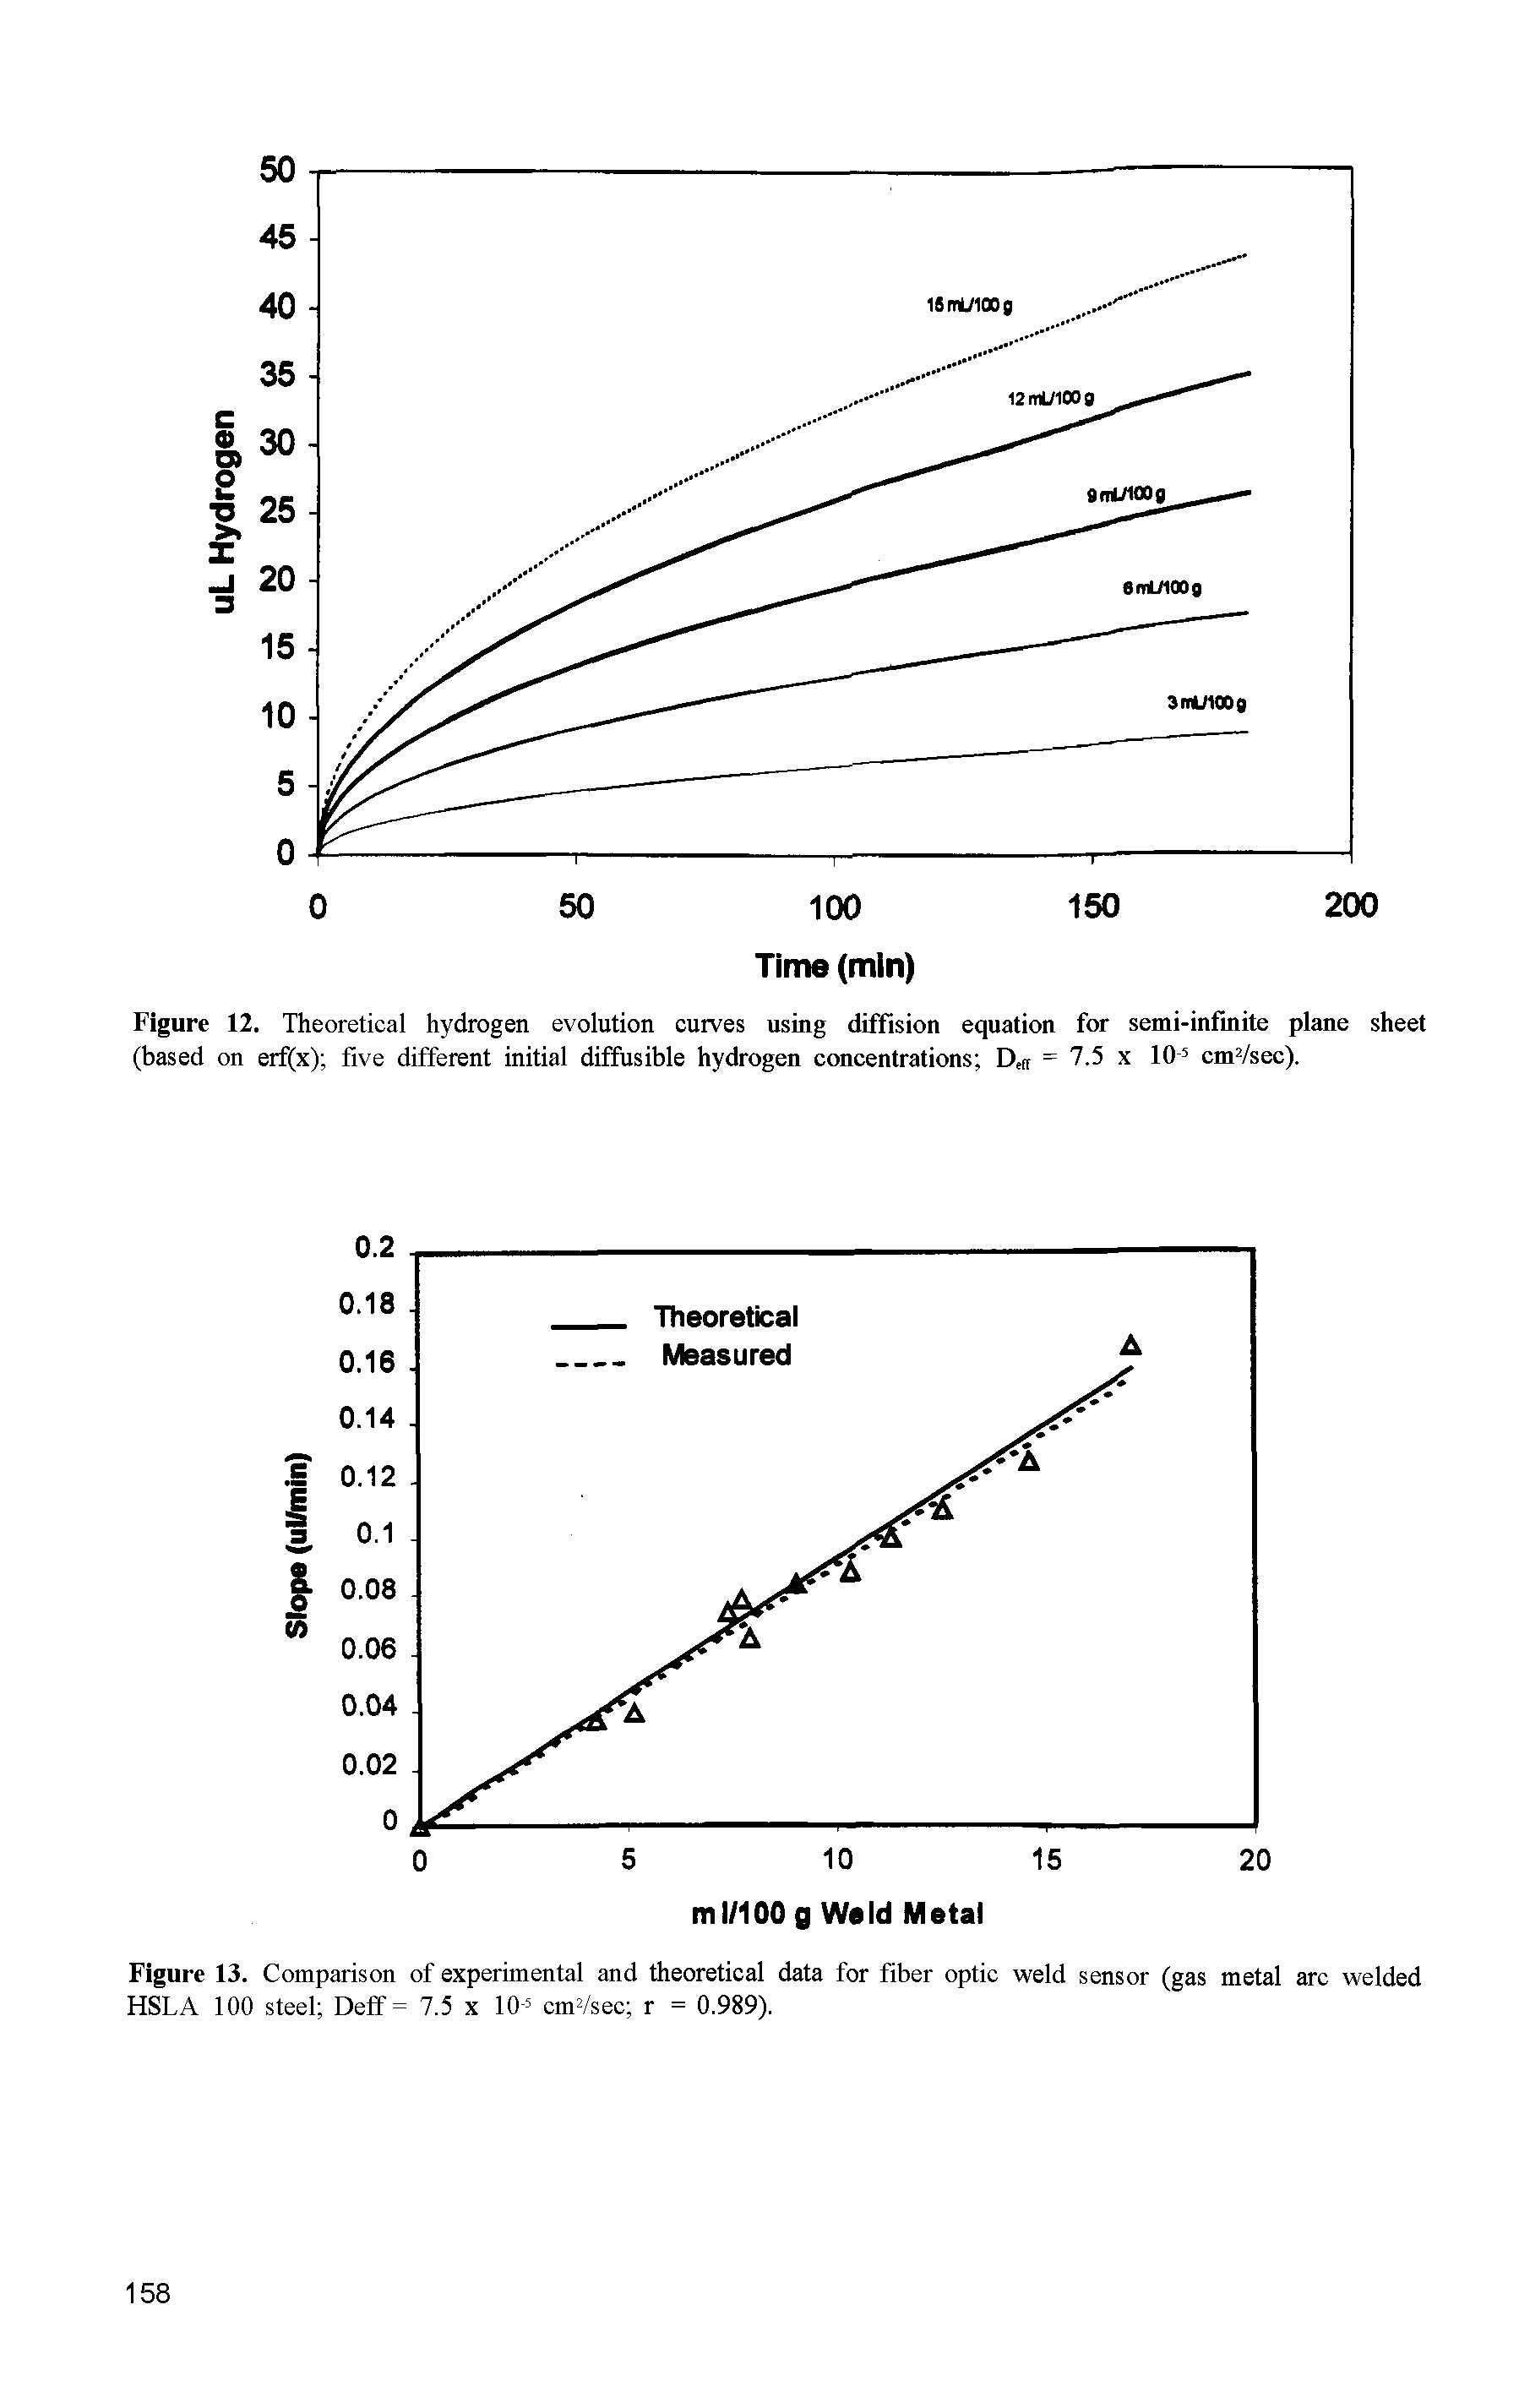 Figure 12. Theoretical hydrogen evolution curves using diffision equation for semi-infinite plane sheet (based on erf(x) five different initial diffusible hydrogen concentrations Dtrt = 7.5 x 105 cm2/sec).